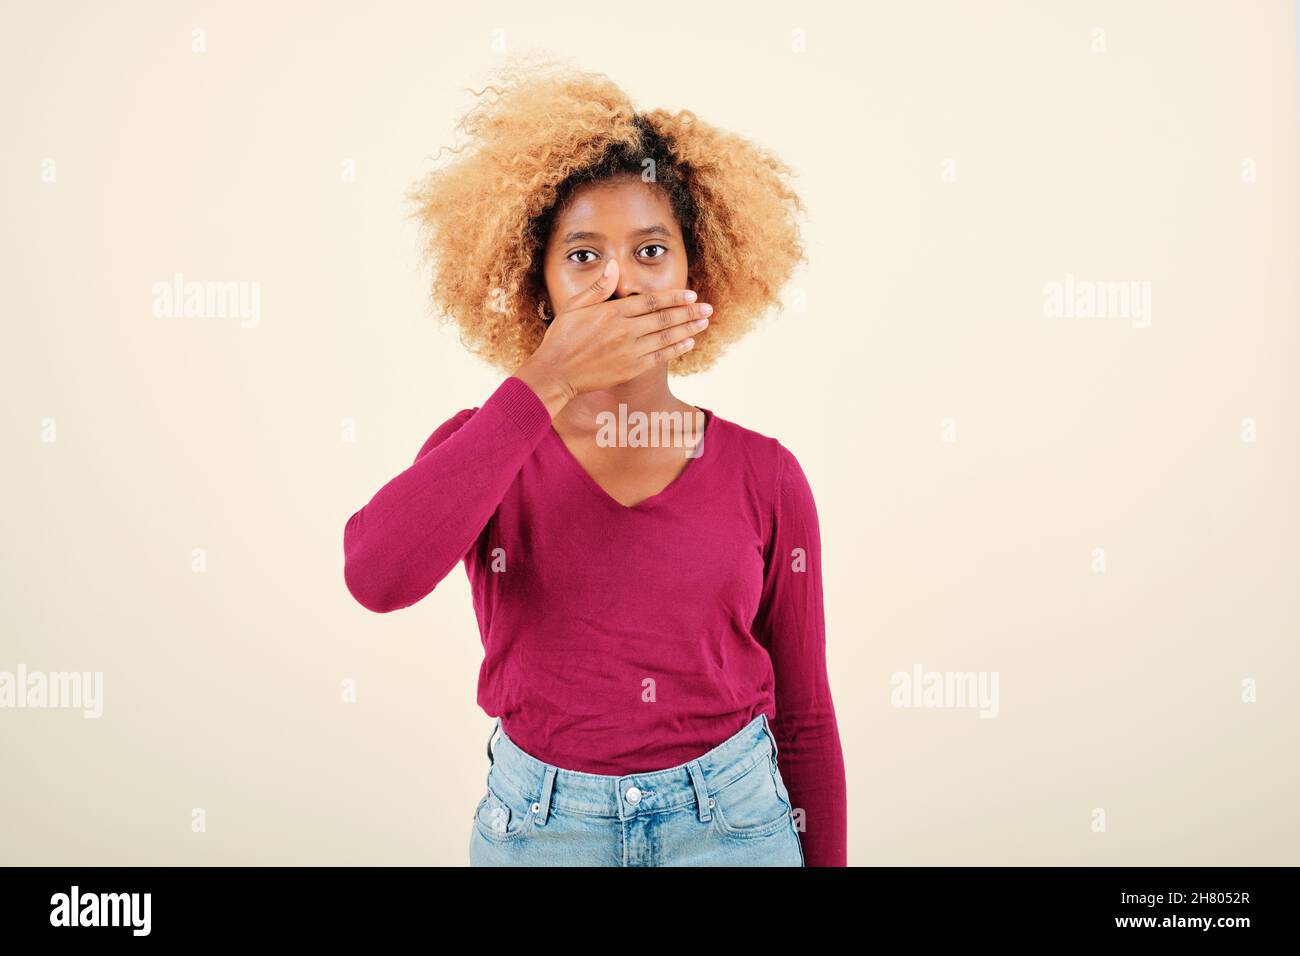 Young woman with afro hairstyle looking shocked while covering mouth with hands. Stock Photo